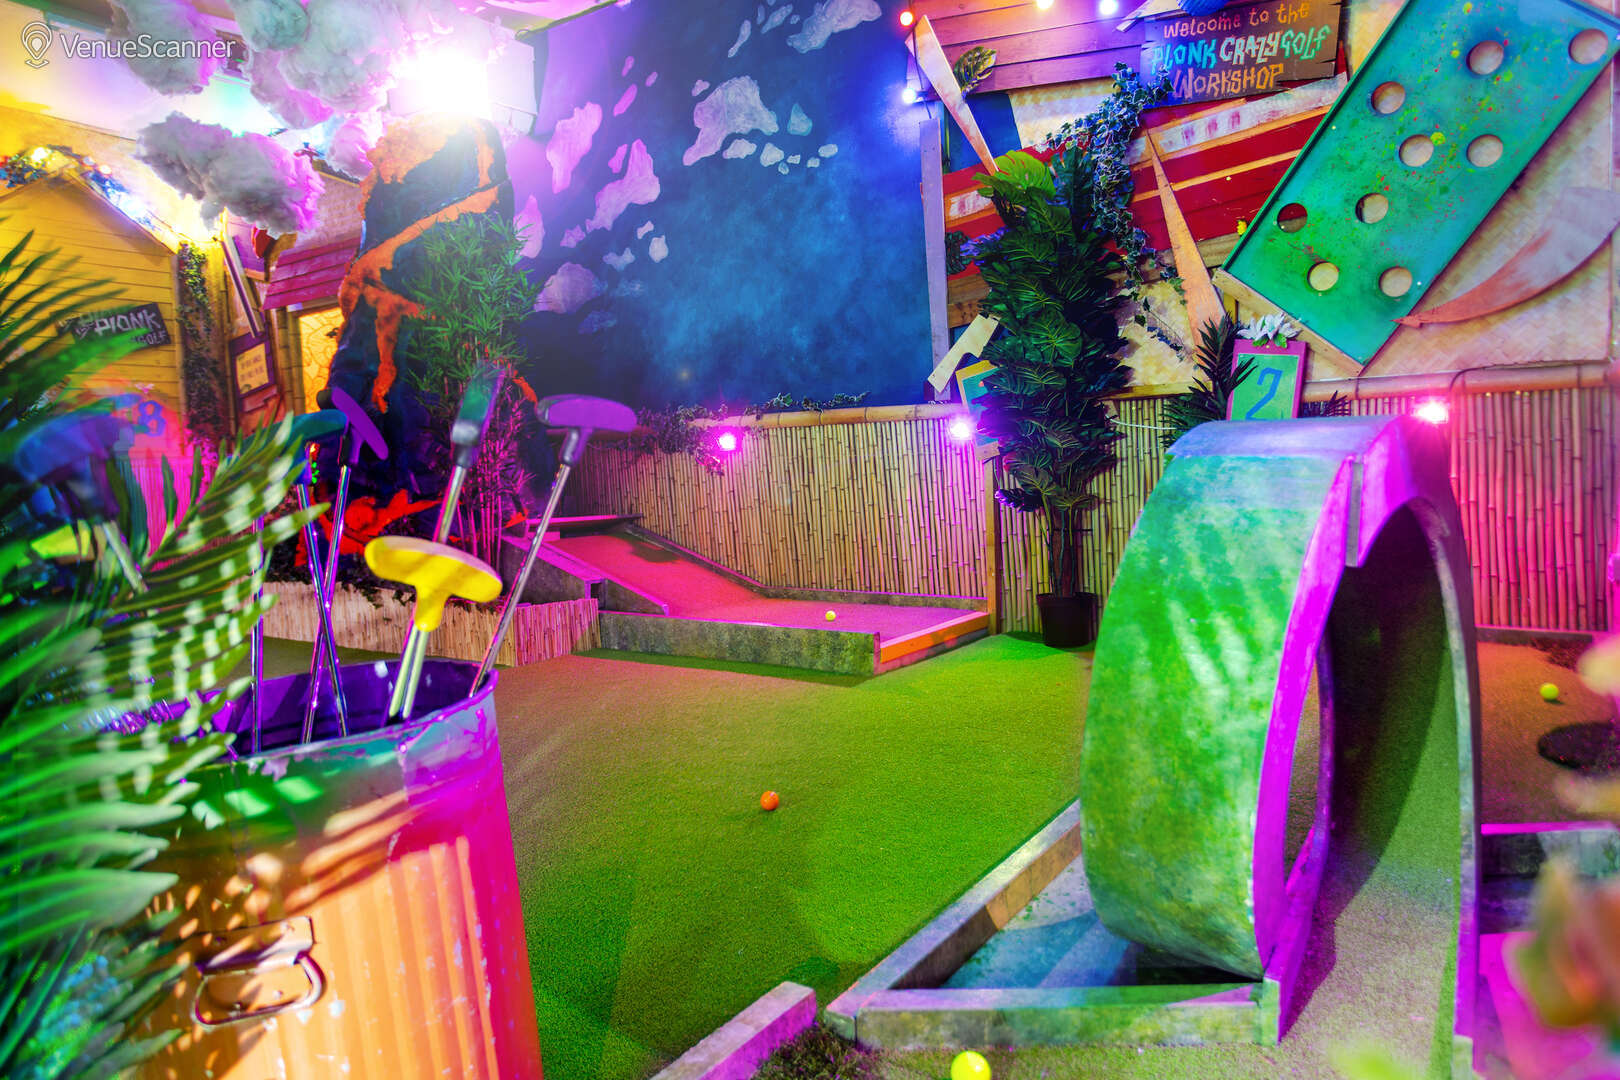 Hire Plonk Crazy Golf Shoreditch The Whole Course